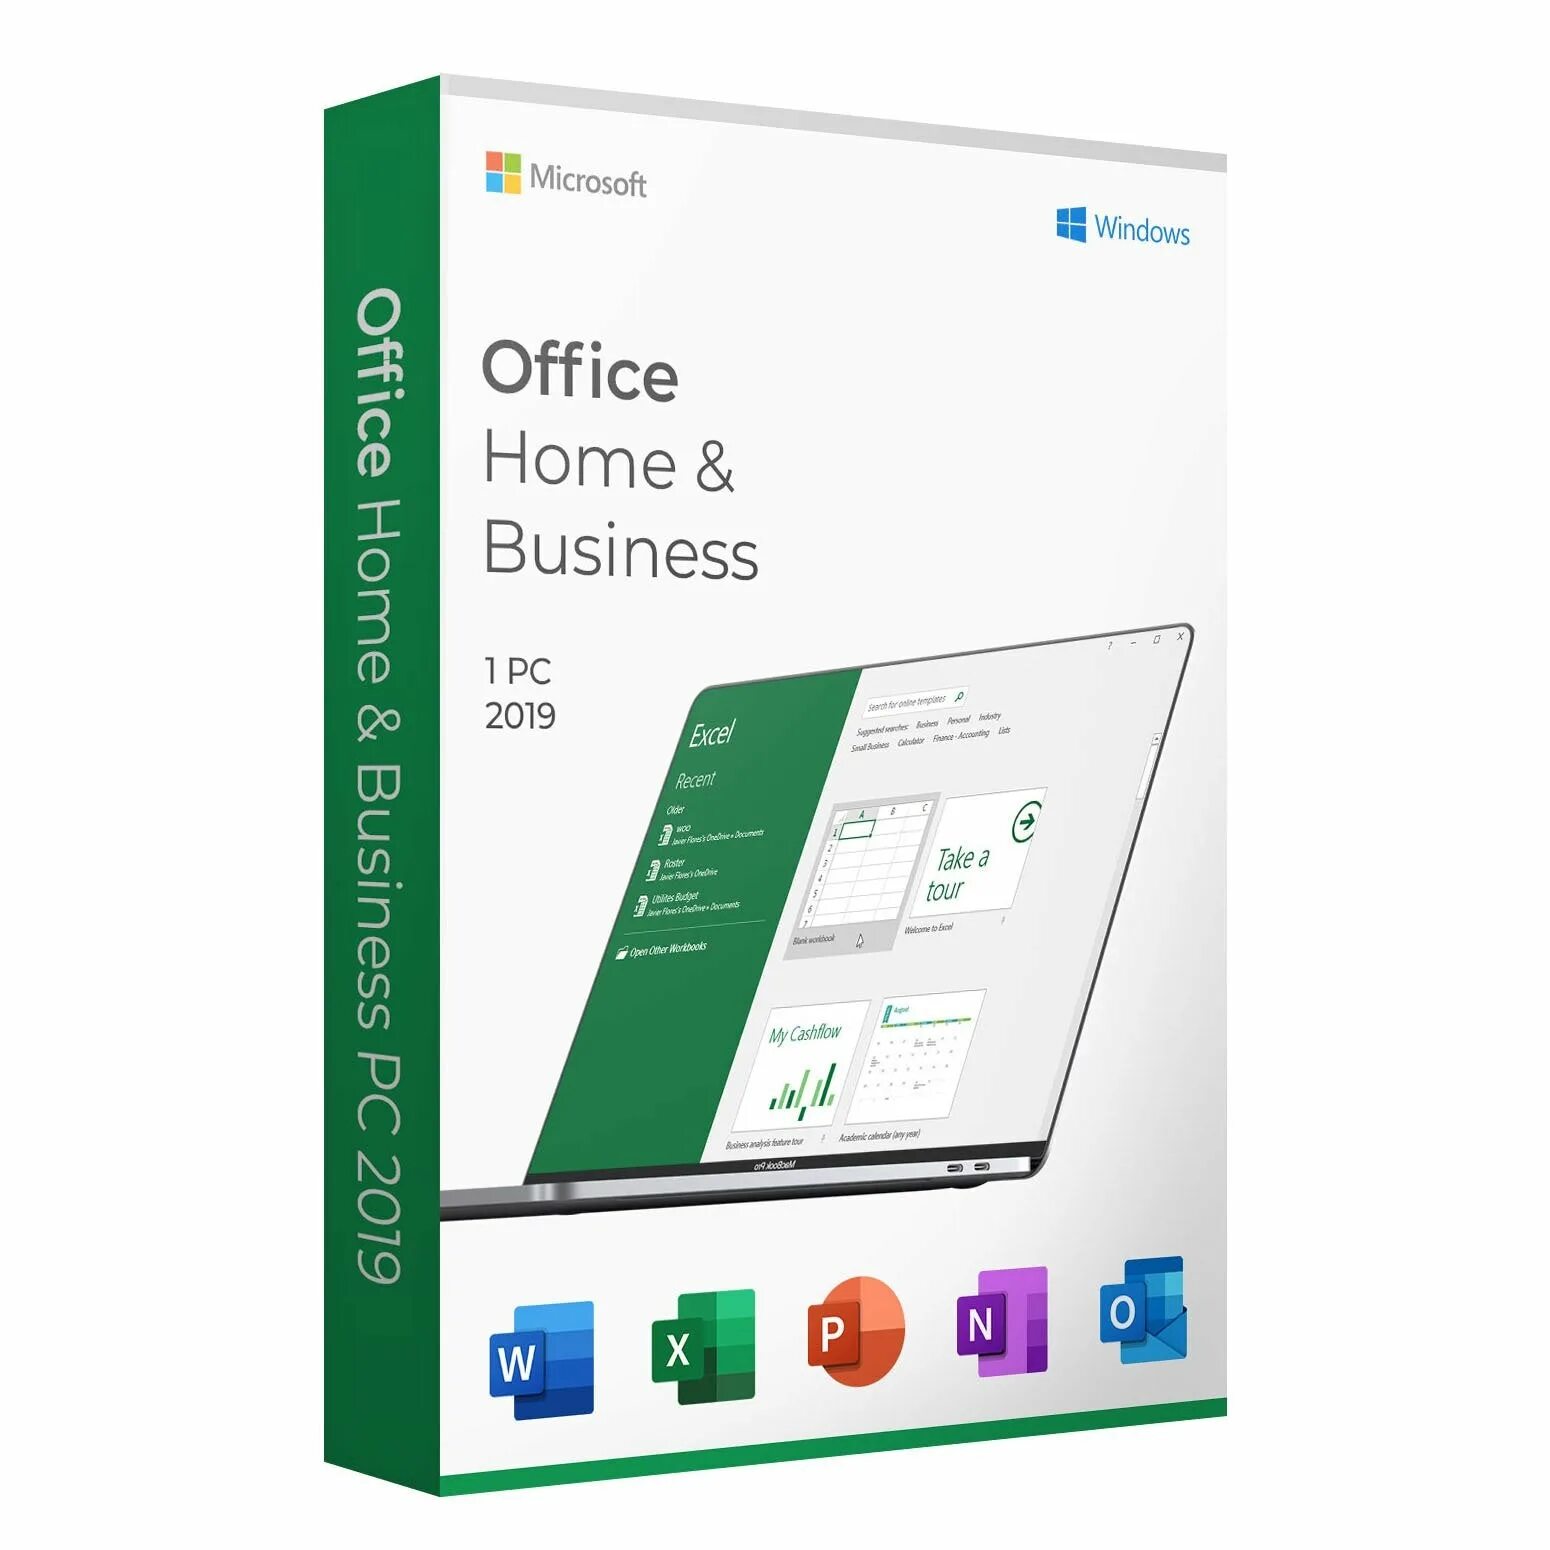 Microsoft Office 2019 Home and Business. Office 2019 Home and Business Box. Офисное приложение MS Office Home and Business 2021 professional Plus. Microsoft Office 2019 Home and Business for Mac.